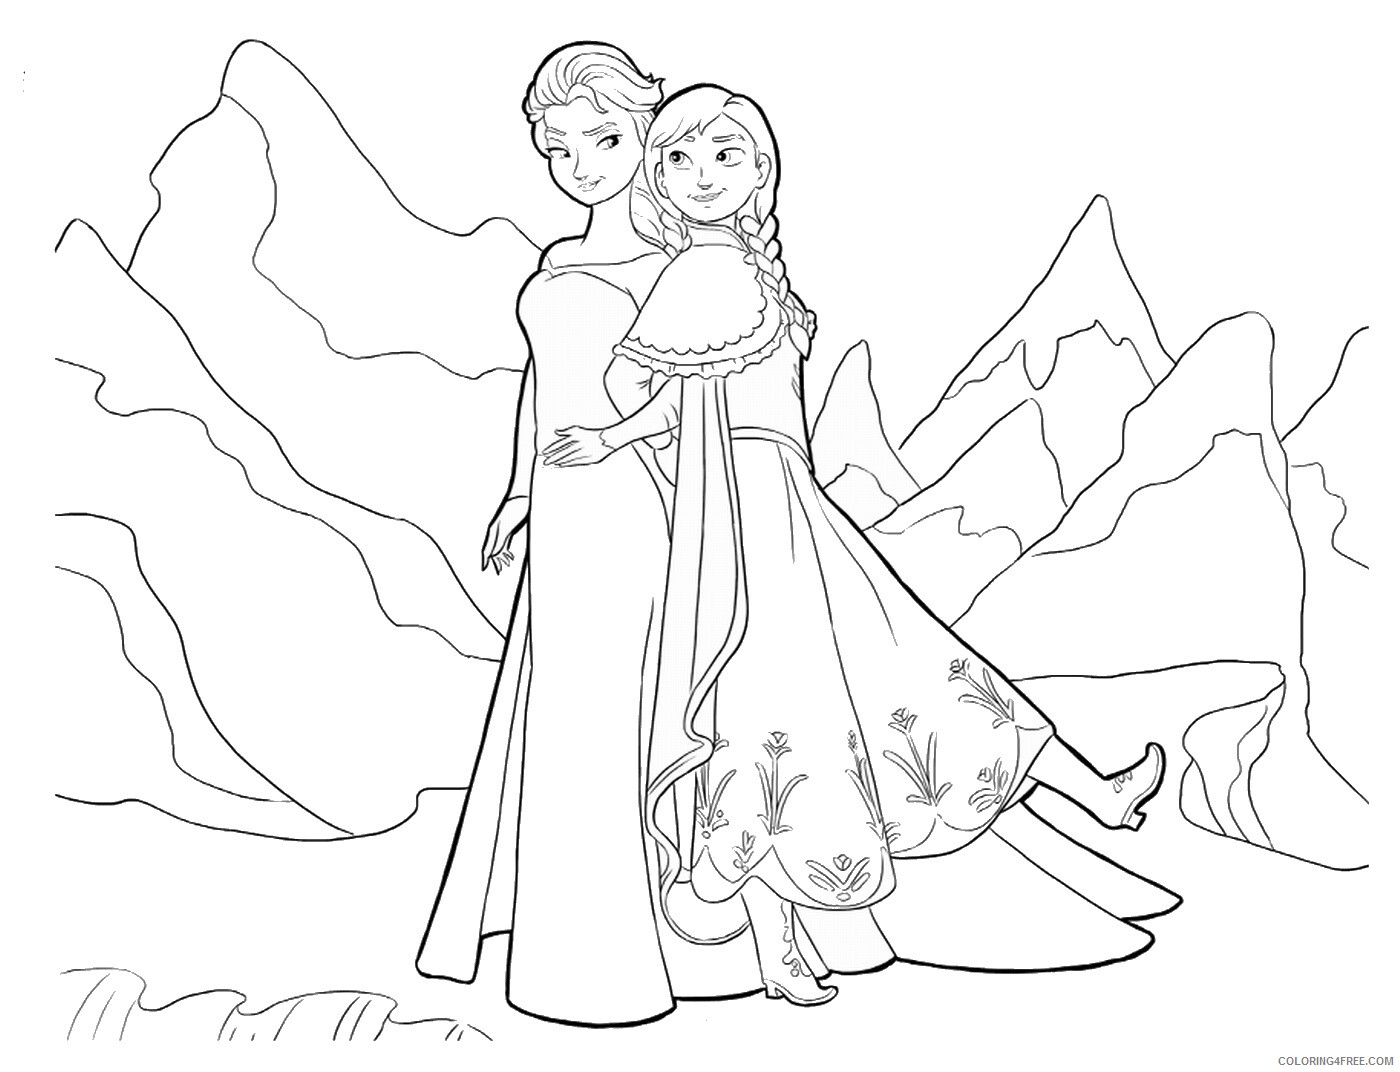 Frozen Coloring Pages TV Film frozen_coloring_13 Printable 2020 03130 Coloring4free